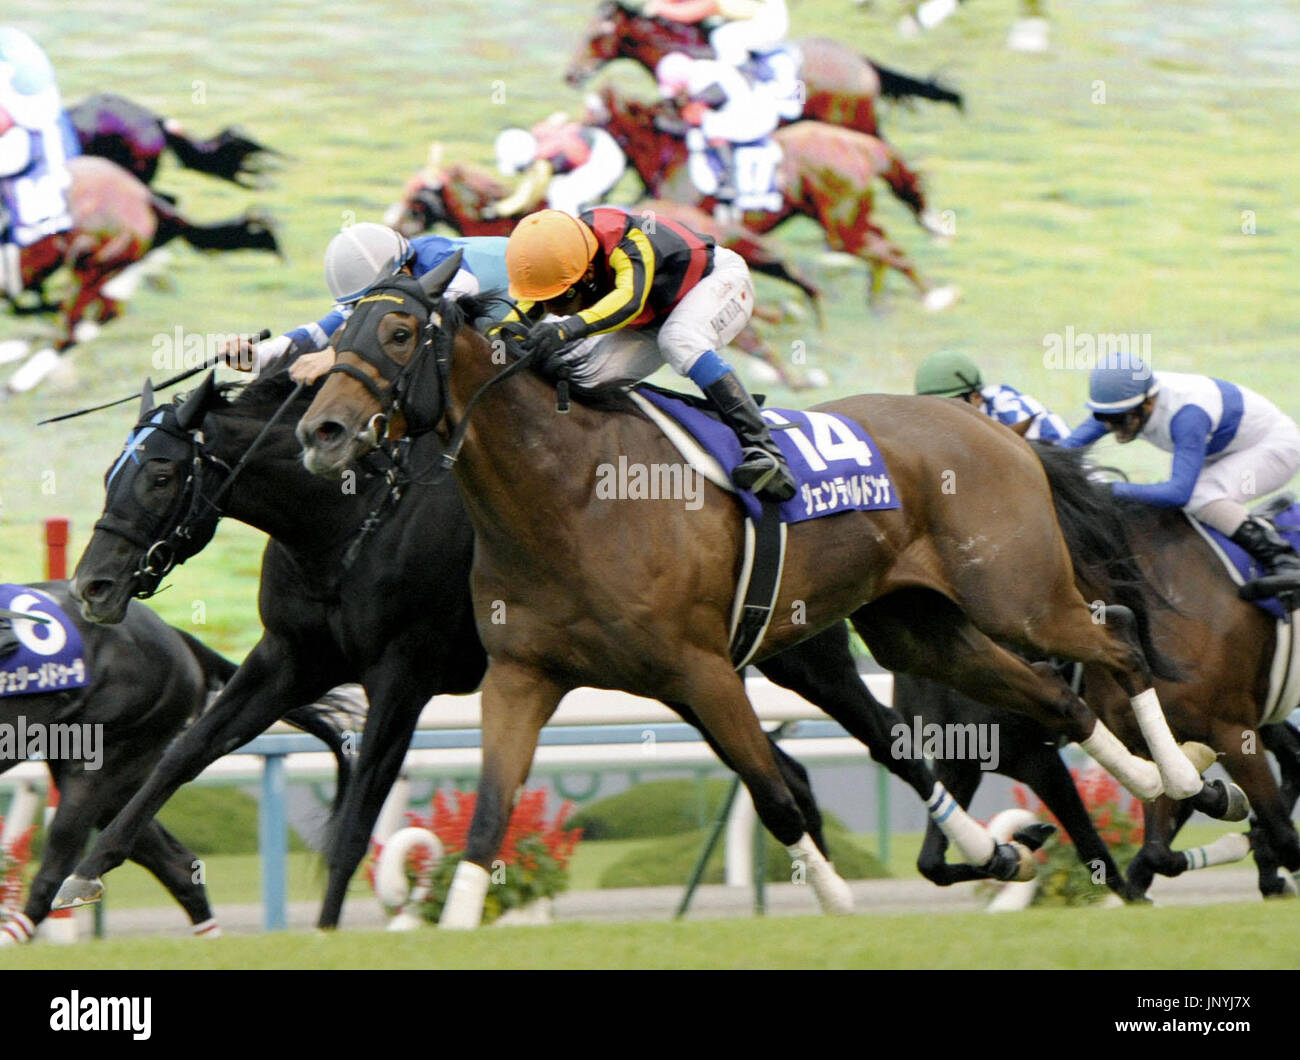 KYOTO, Japan - Gentildonna (front) gallops to victory at the Shuka-sho at Kyoto Racecourse on Oct. 14, 2012, to complete the Triple Crown. Top pick Gentildonna covered the 2,000-meter turf track in 2 minutes, 0.4 seconds, to become only the fourth filly to achieve the feat. (Kyodo) Stock Photo